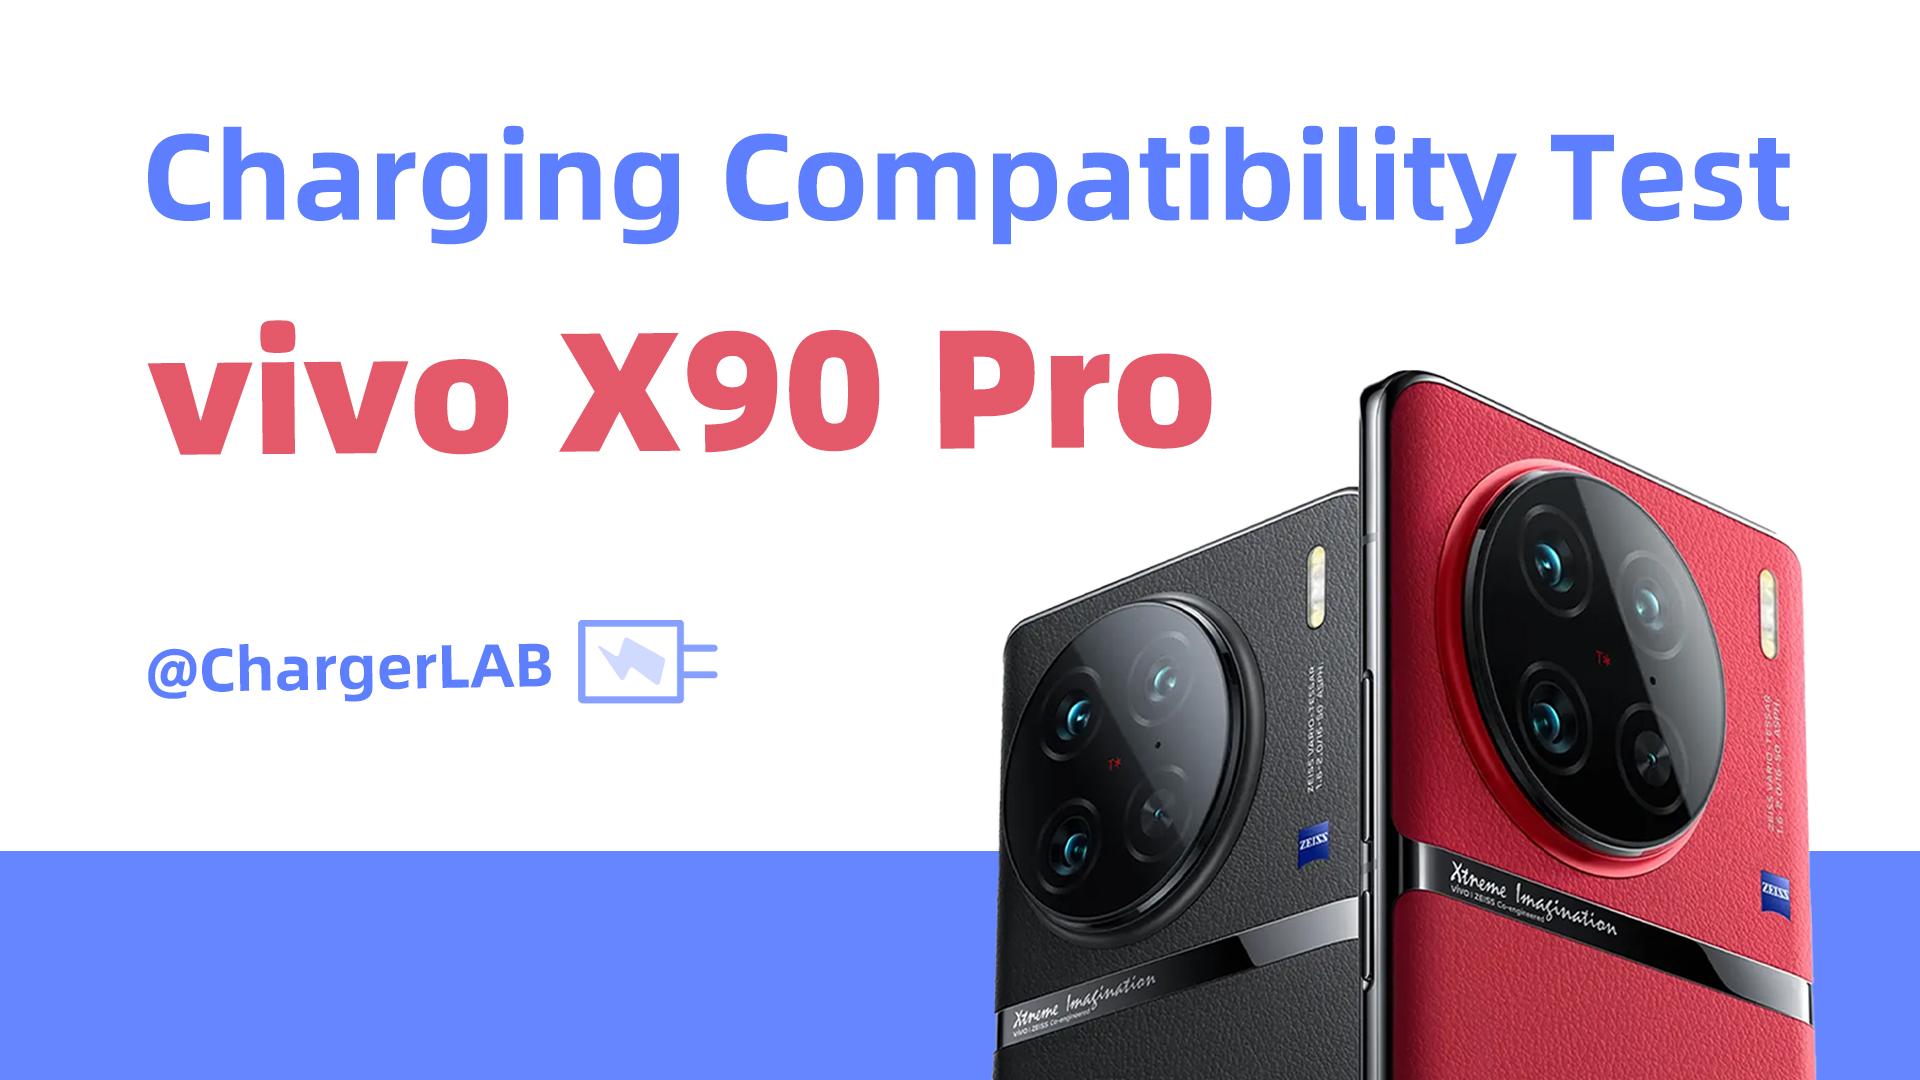 Flash Charge  Charging Compatibility Test of vivo X90 Pro - Chargerlab